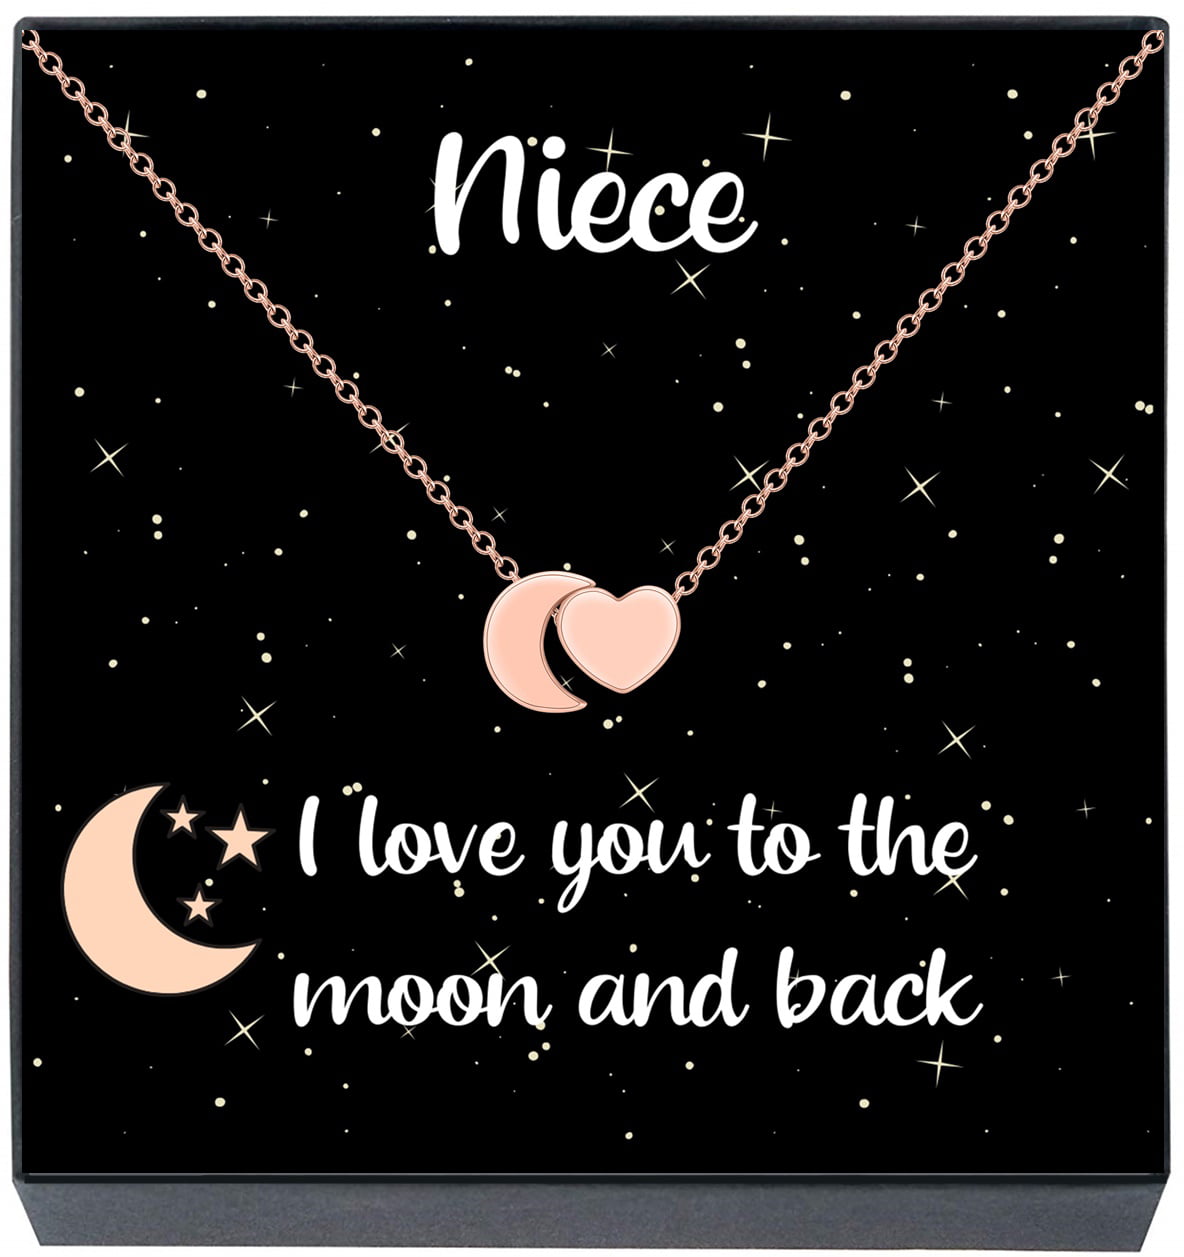 birthday card or xmas christmas present from Auntie or Uncle Niece Sterling silver necklace chain and heart pendant gifts for her sentimental gift women her special